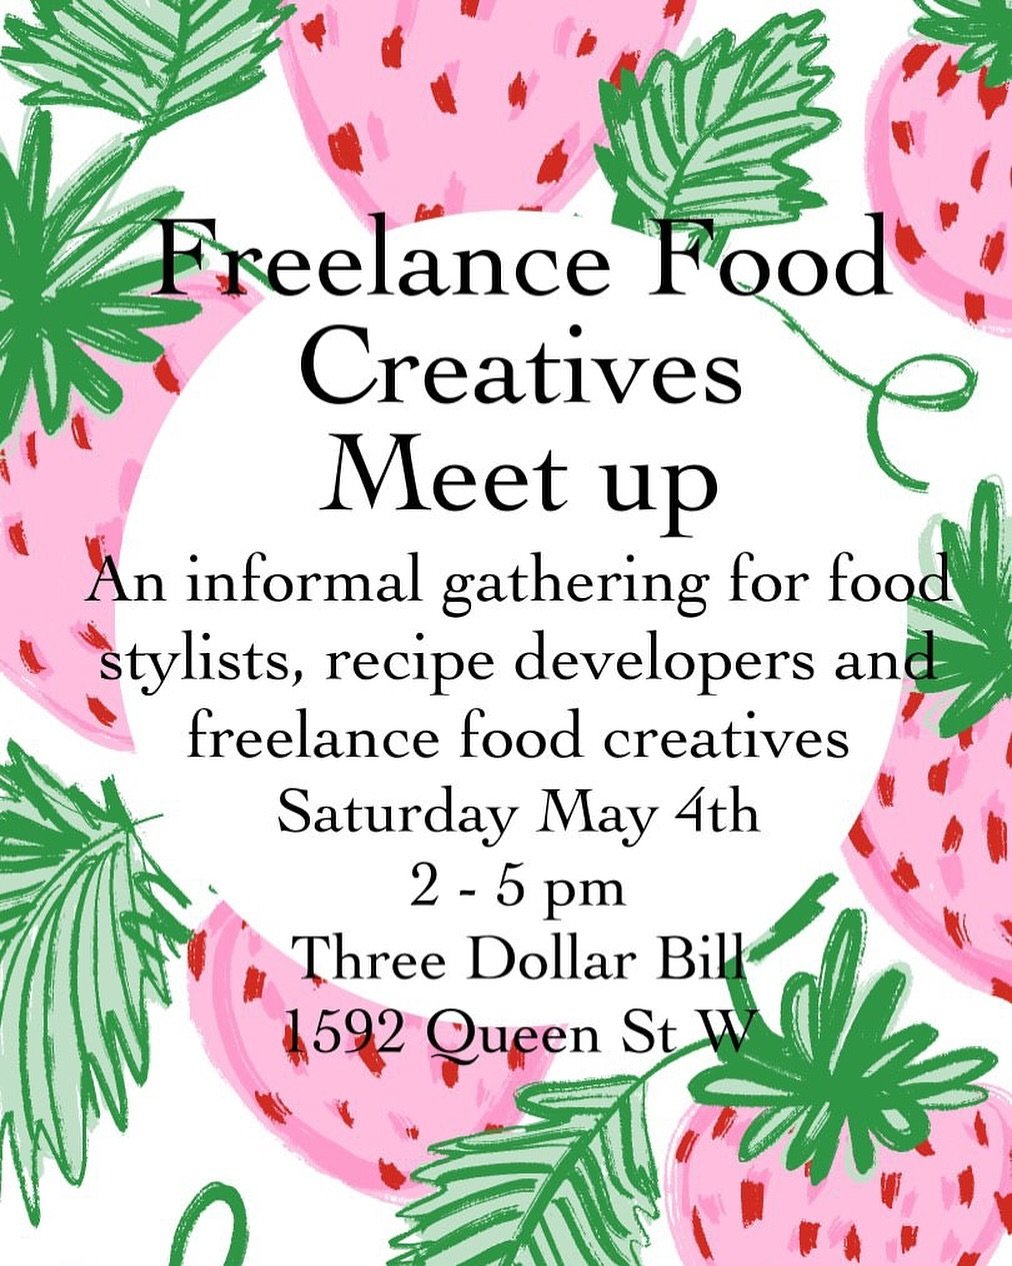 🌸🎂This Saturday Afternoon 🎂🌸 @haleythemaker has organized a sweet afternoon for all Food Freelancers to meet from 2 - 5 pm.  This is not a food popup however it is an opportunity to meet fellow queer foodies to brainstorm creative, fun, and tasty